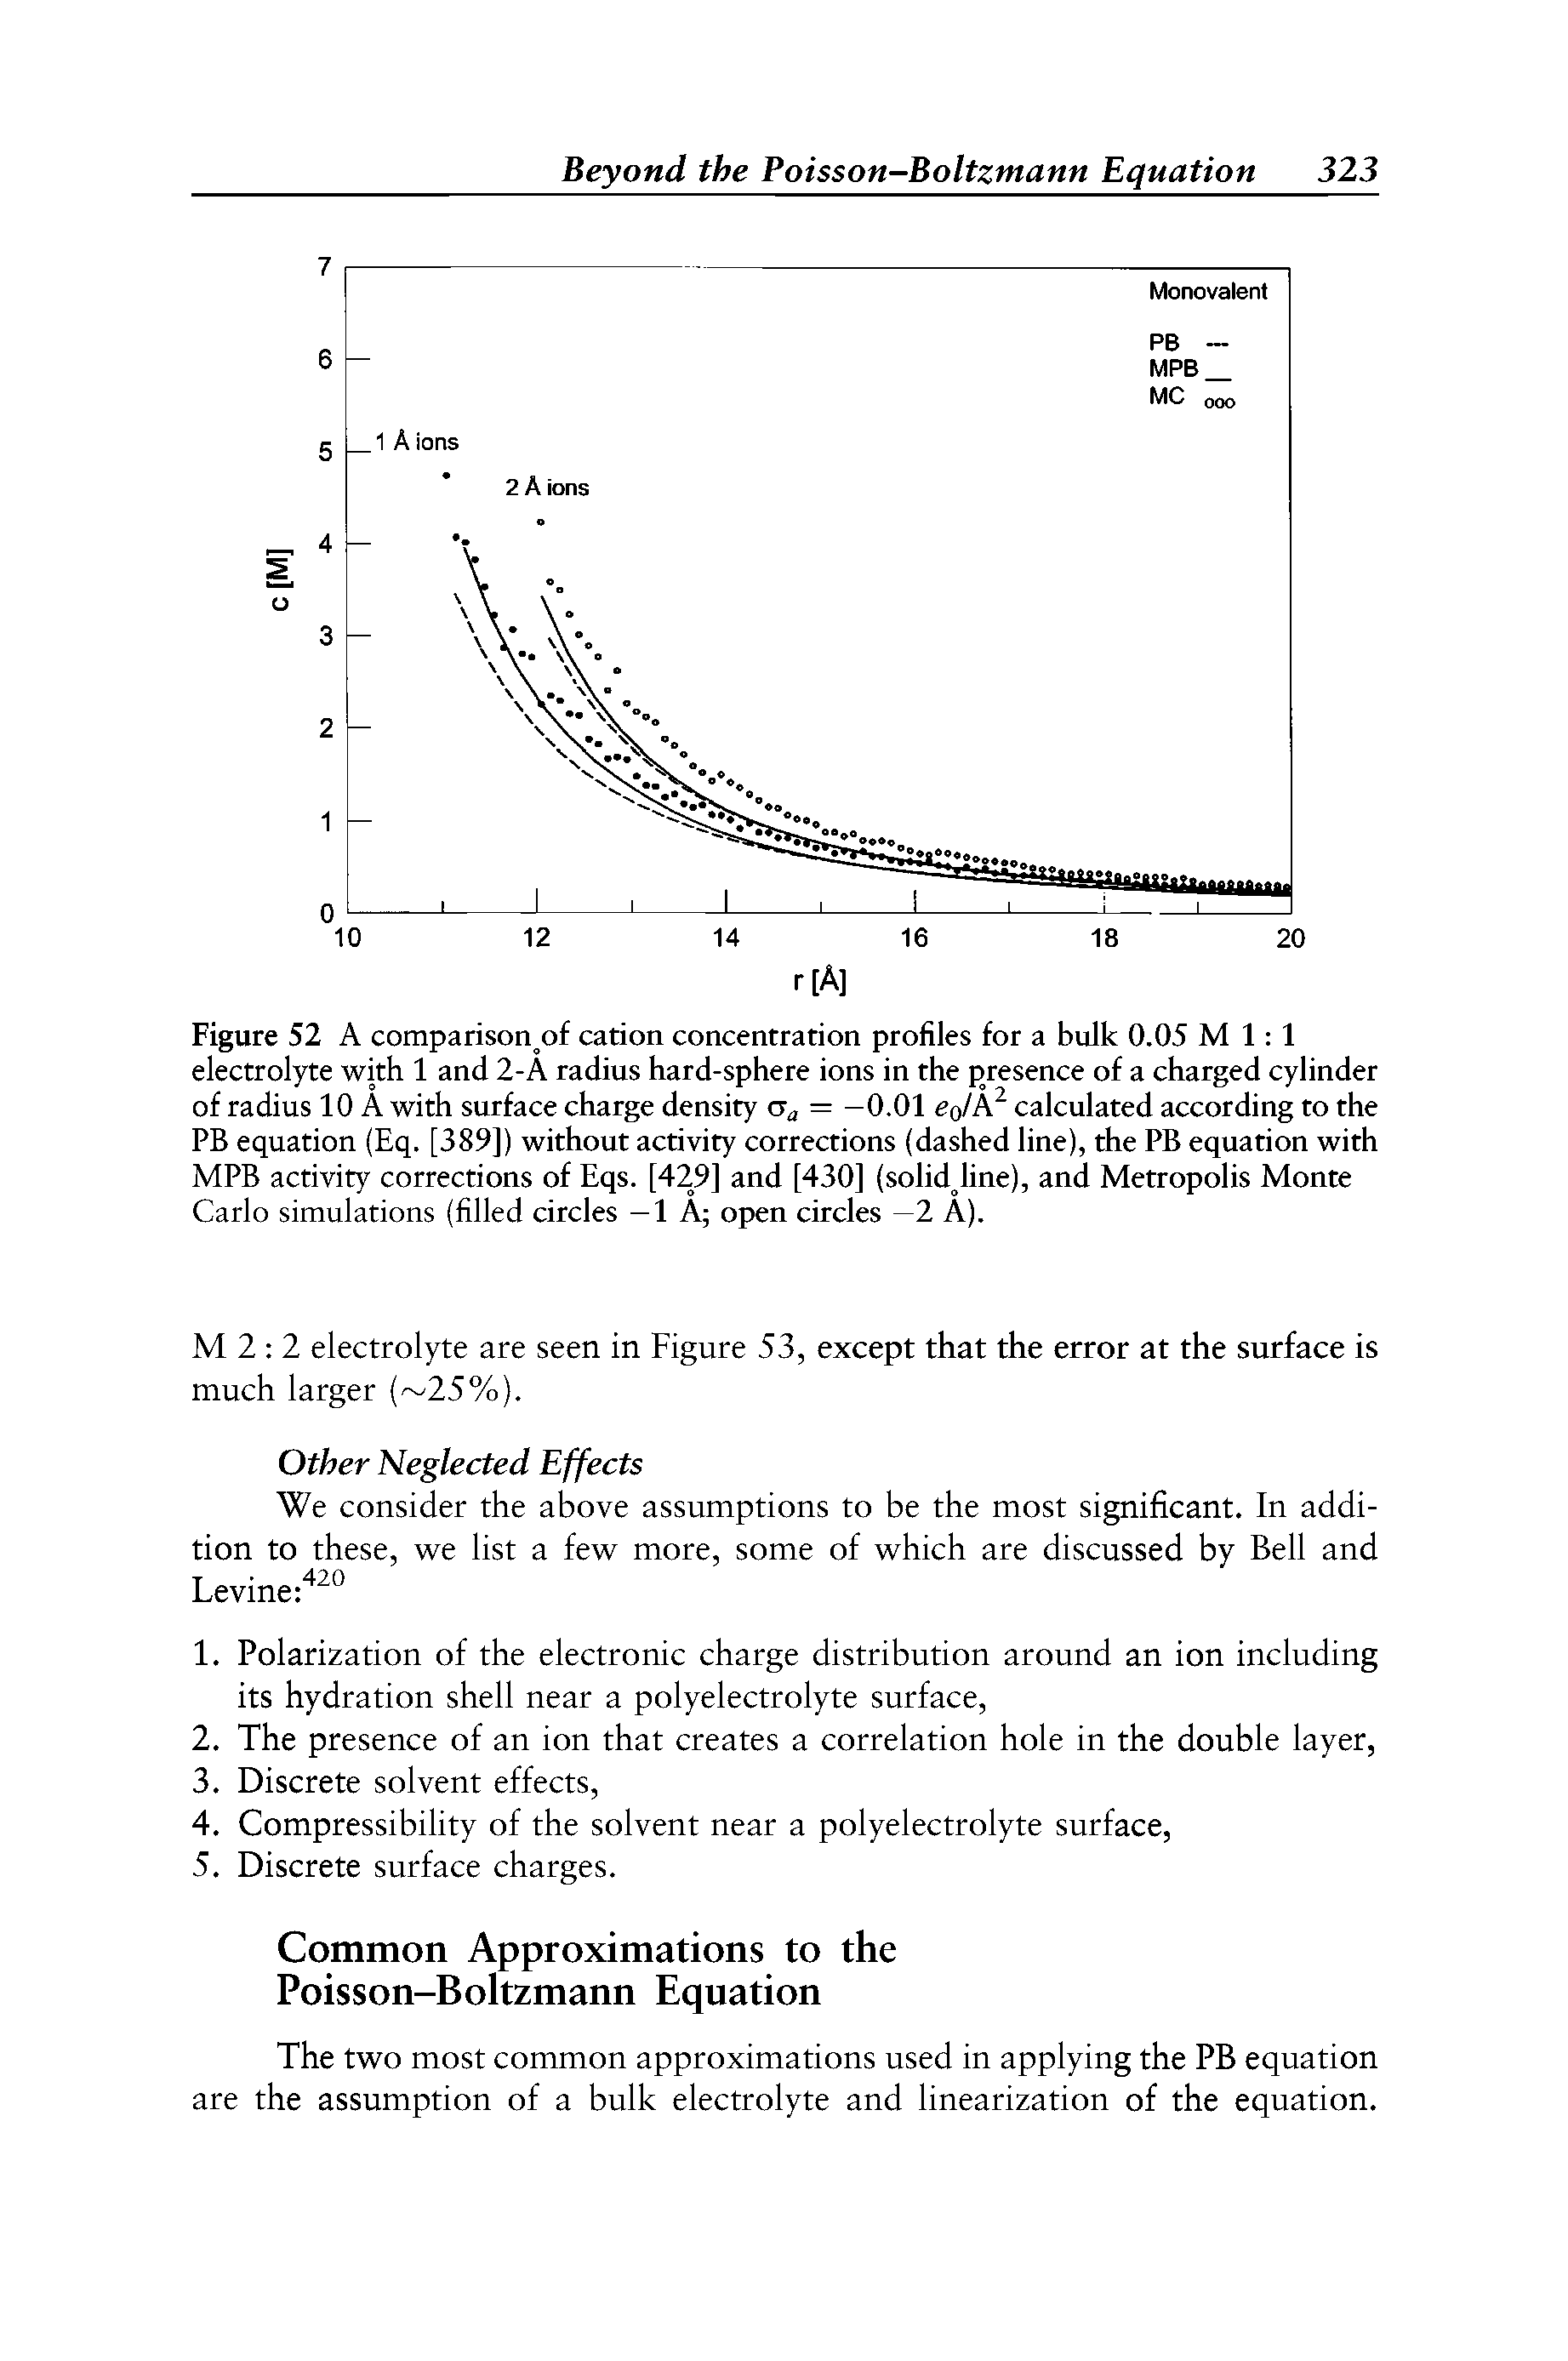 Figure 52 A comparison of cation concentration profiles for a bulk 0.05 M 1 1 electrolyte with 1 and 2-A radius hard-sphere ions in the presence of a charged cylinder of radius 10 A with surface charge density = —0.01 eo/A calculated according to the PB equation (Eq. [389]) without activity corrections (dashed line), the PB equation with MPB activity corrections of Eqs. [429] and [430] (solid line), and Metropolis Monte Carlo simulations (filled circles —1 A open circles 2 A).